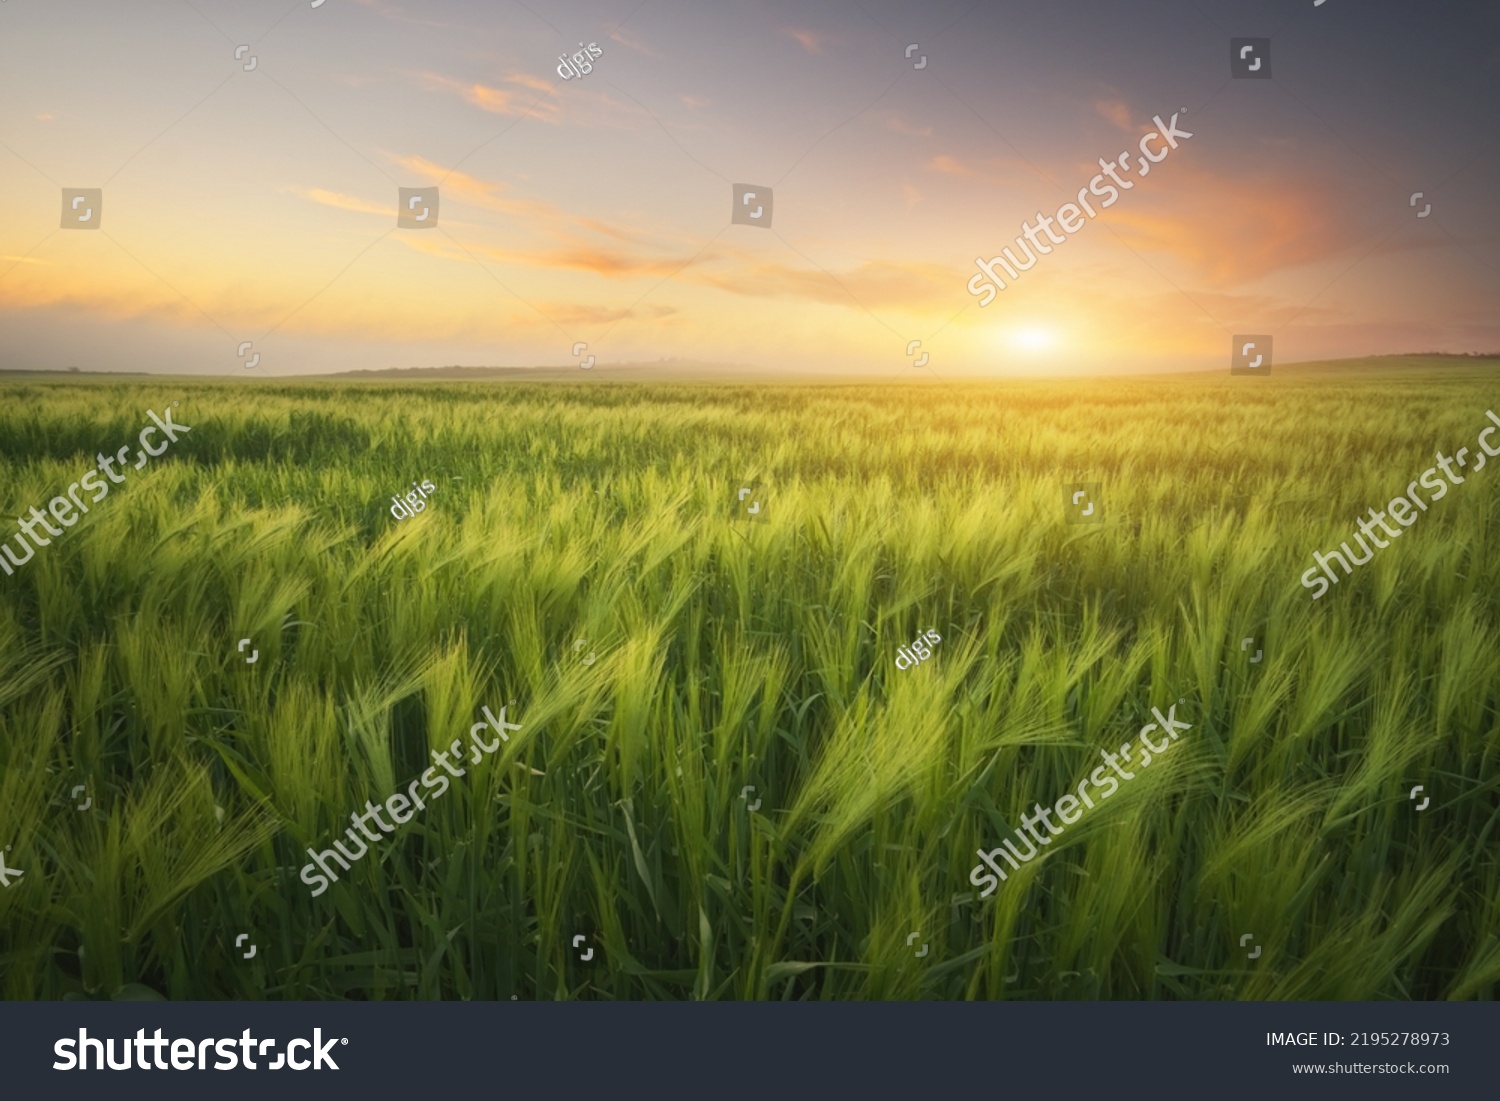 Meadow of wheat on sundown. Nature composition. #2195278973